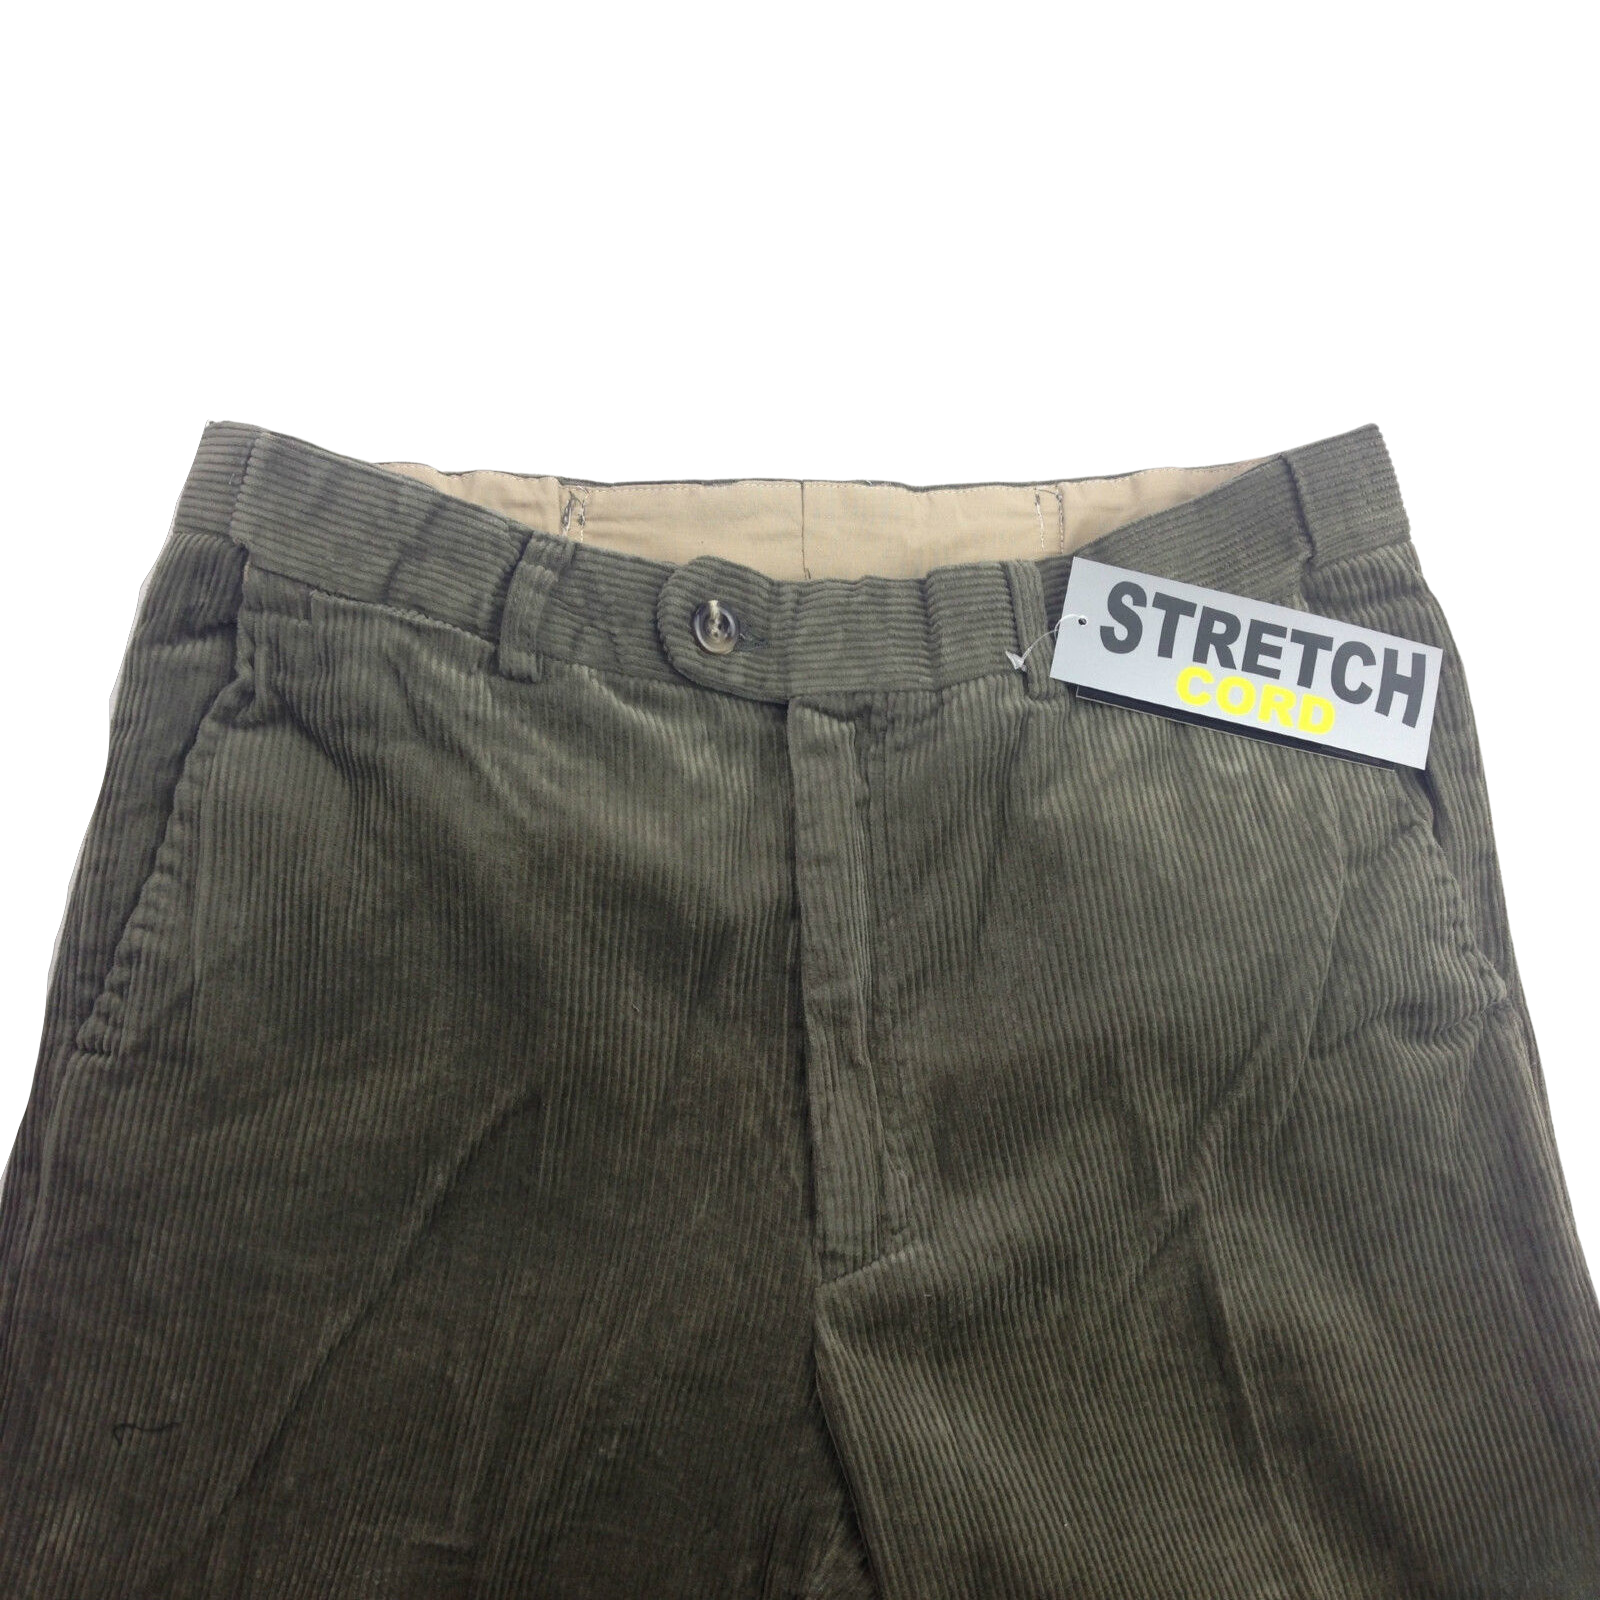 MENS CORDUROY PANTS Trousers Cords Casual STRETCH COTTON Size 32""-44"" Adjustable - Olive (89) - 97 (38"")